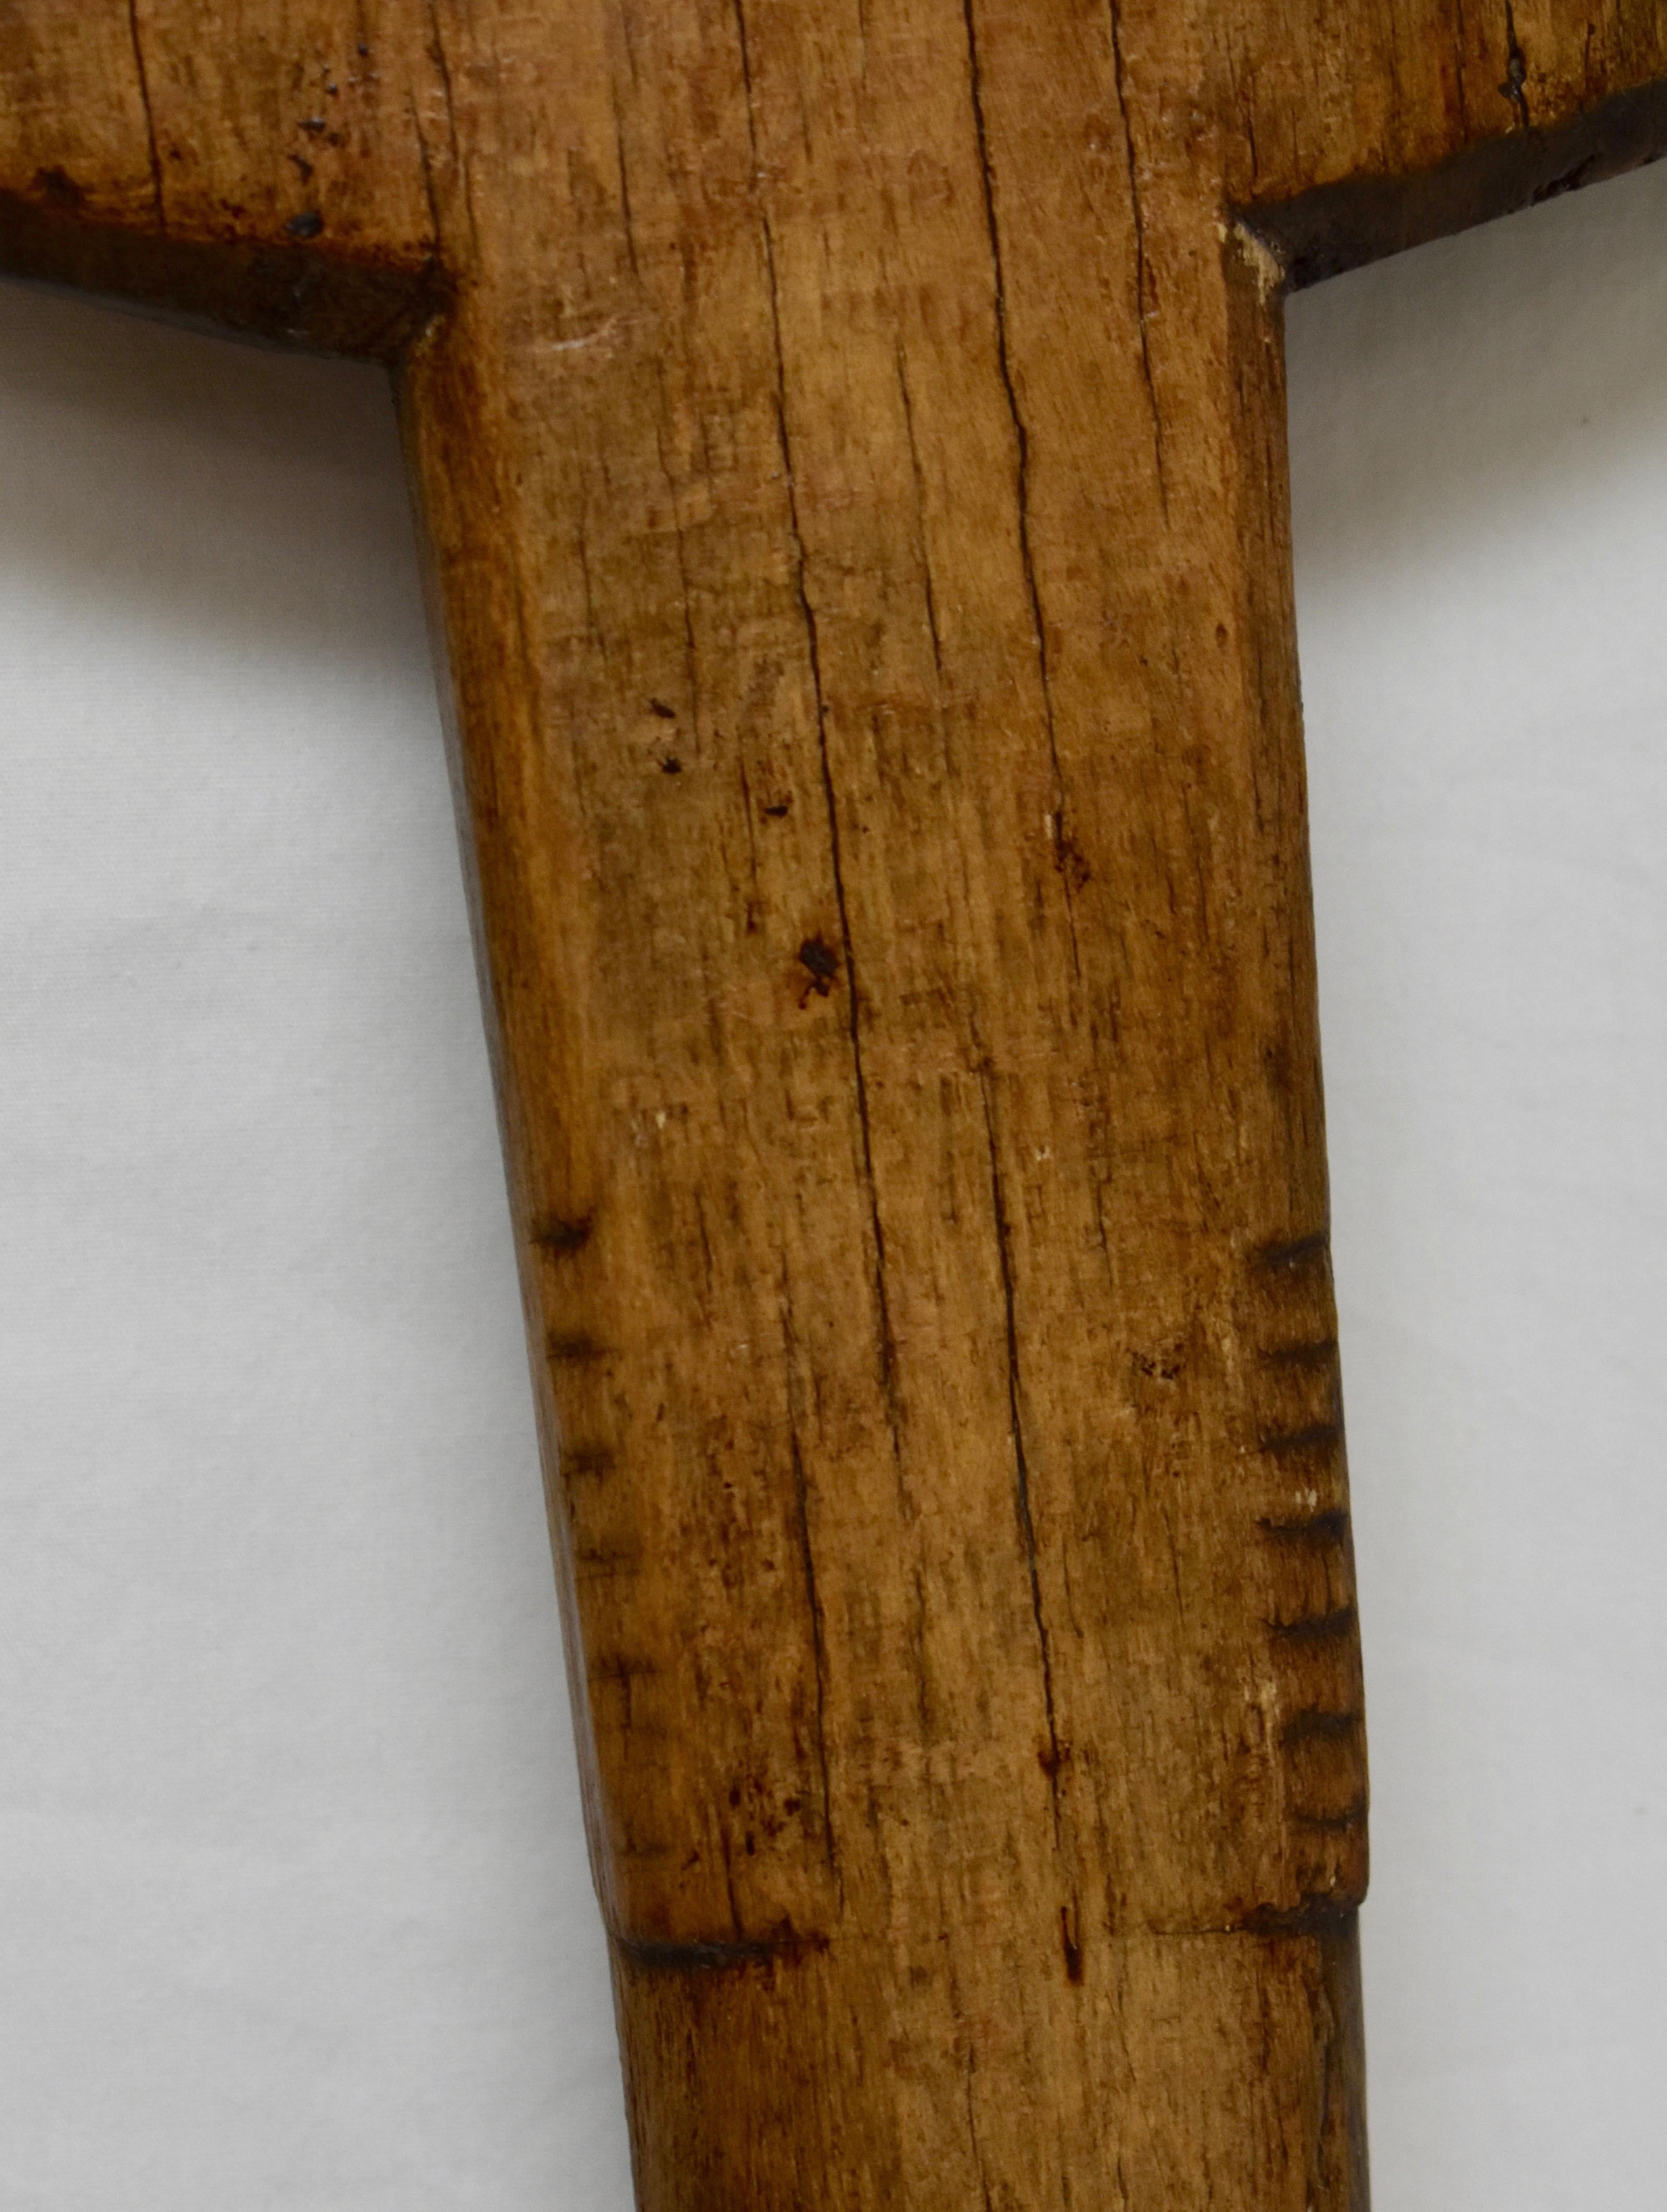 This vintage oak bread peel has been hand-carved from a single board. The long shaft is worn smooth and the paddle shows slight charring and some minor cracks to the edge.